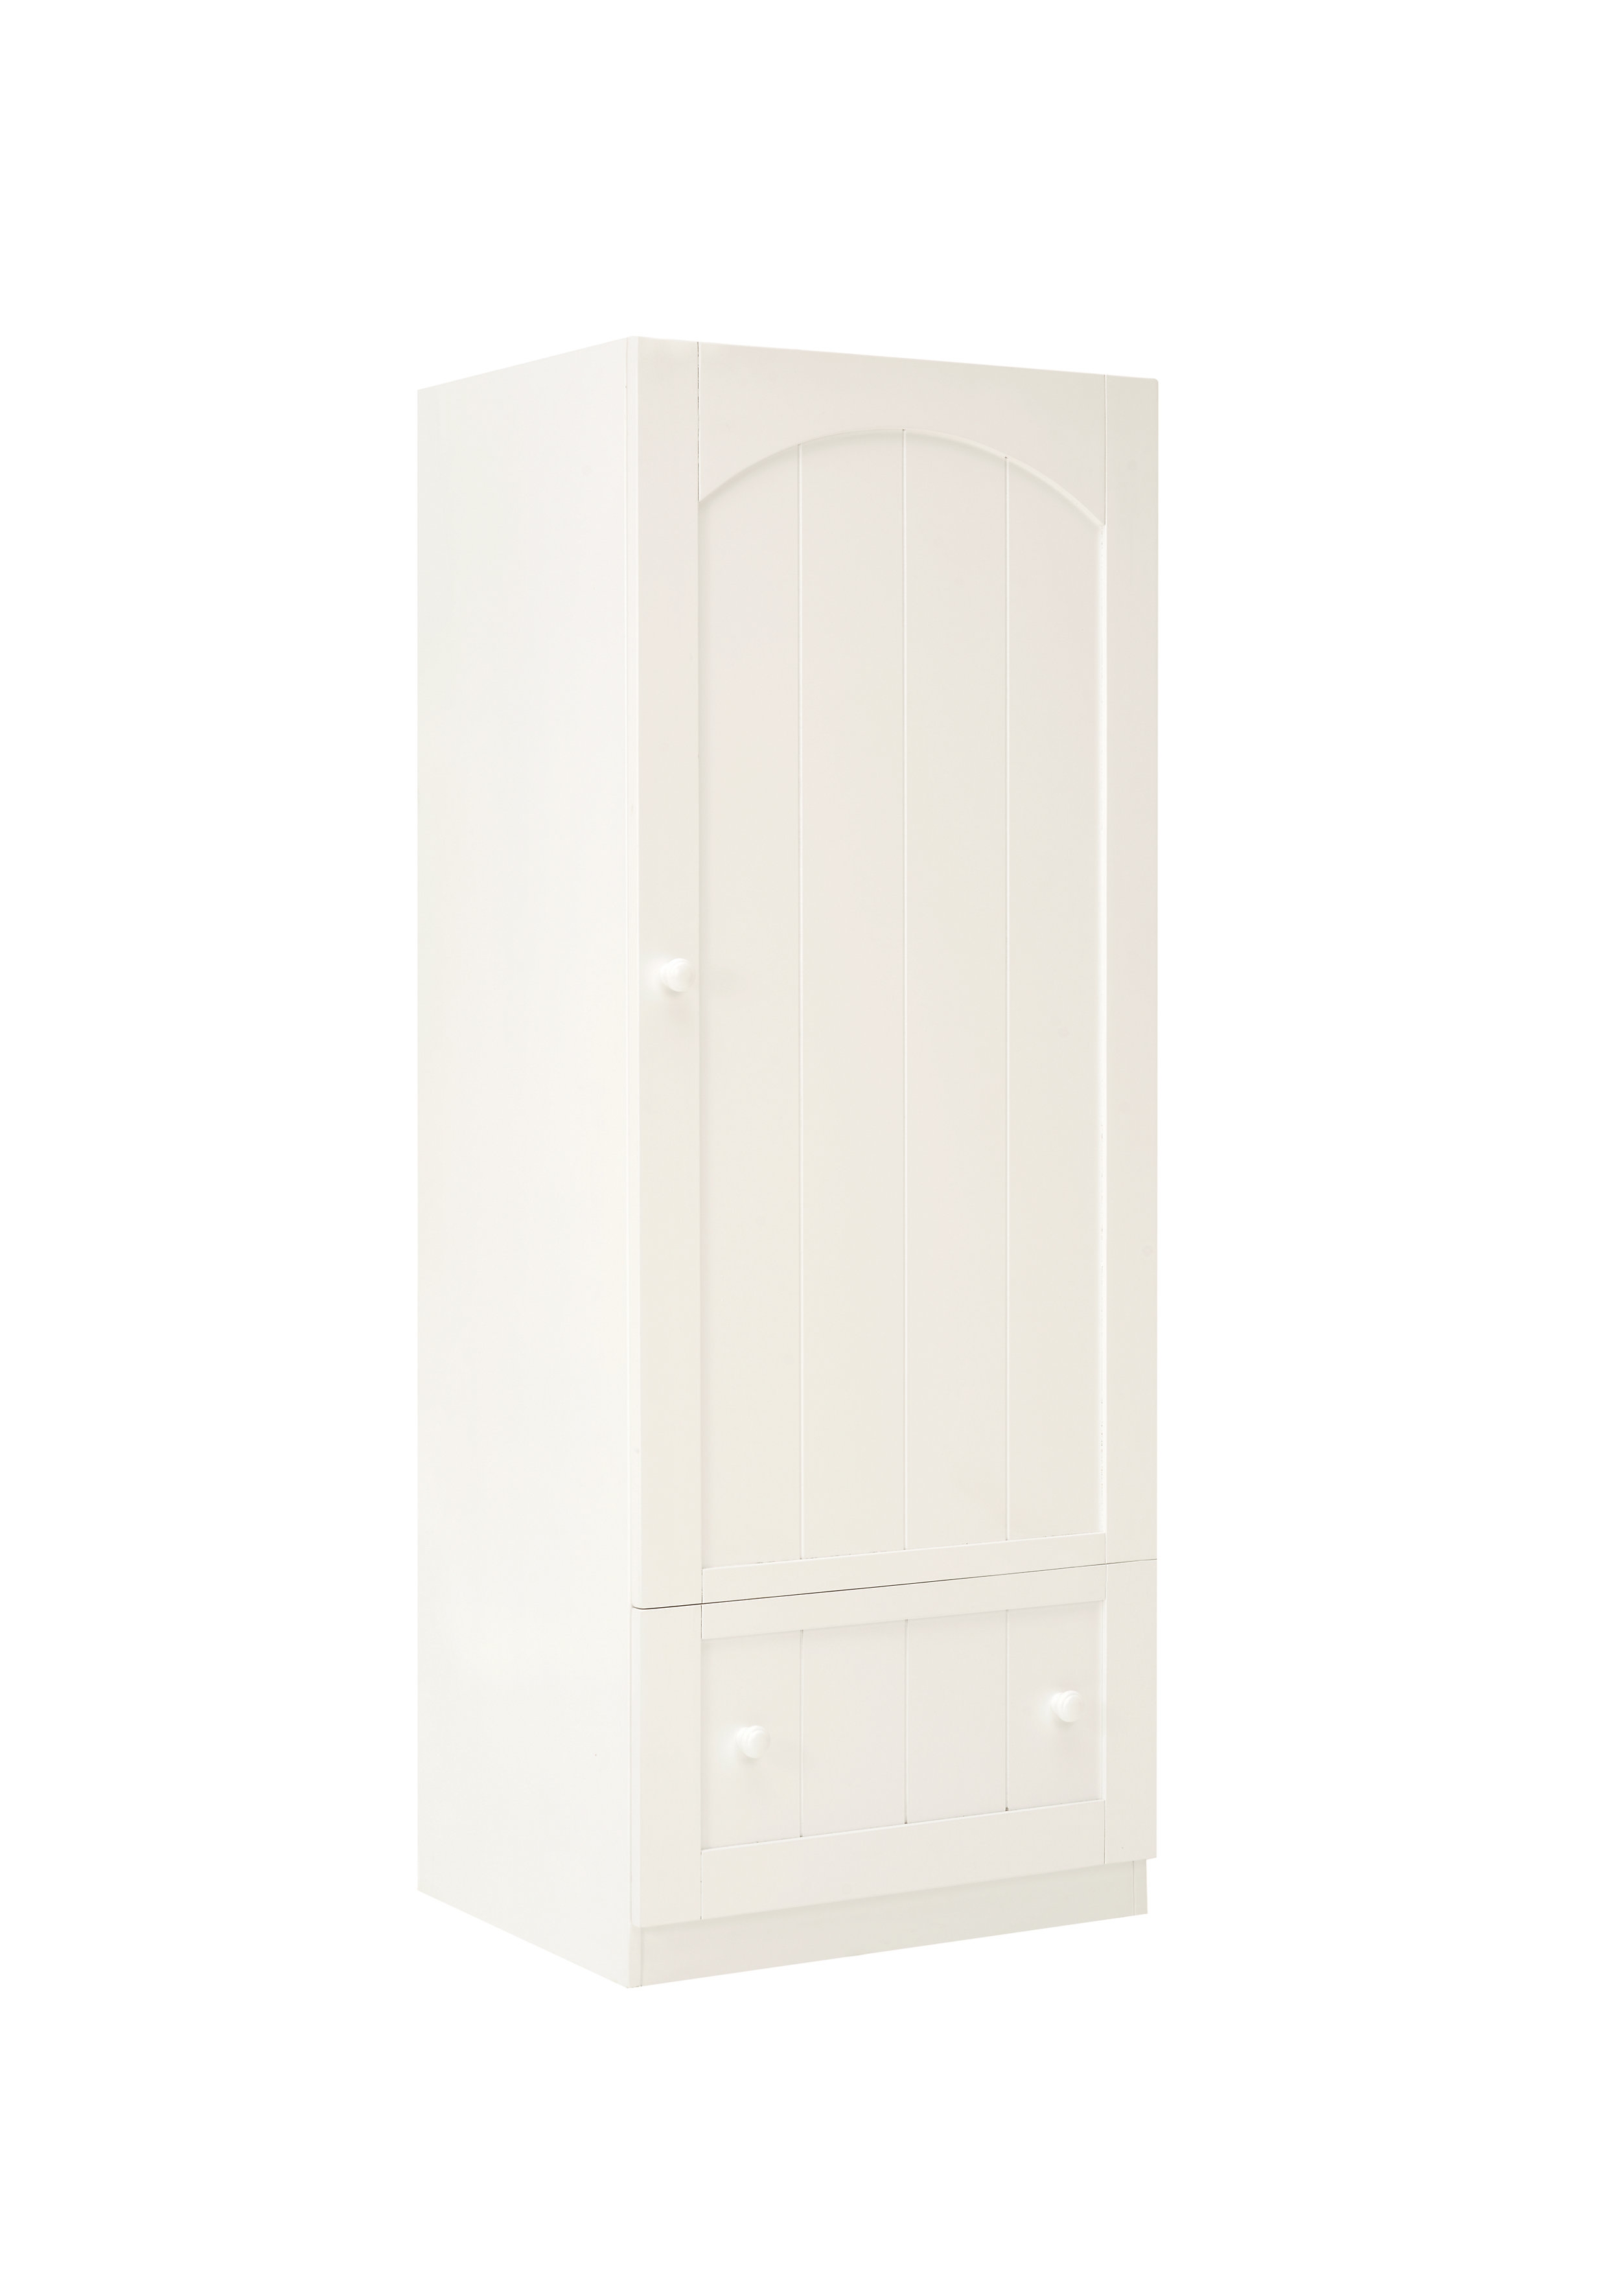 Mothercare | Mothercare Wooden Single Door Wardrobe Baby Storage Cabinet White  